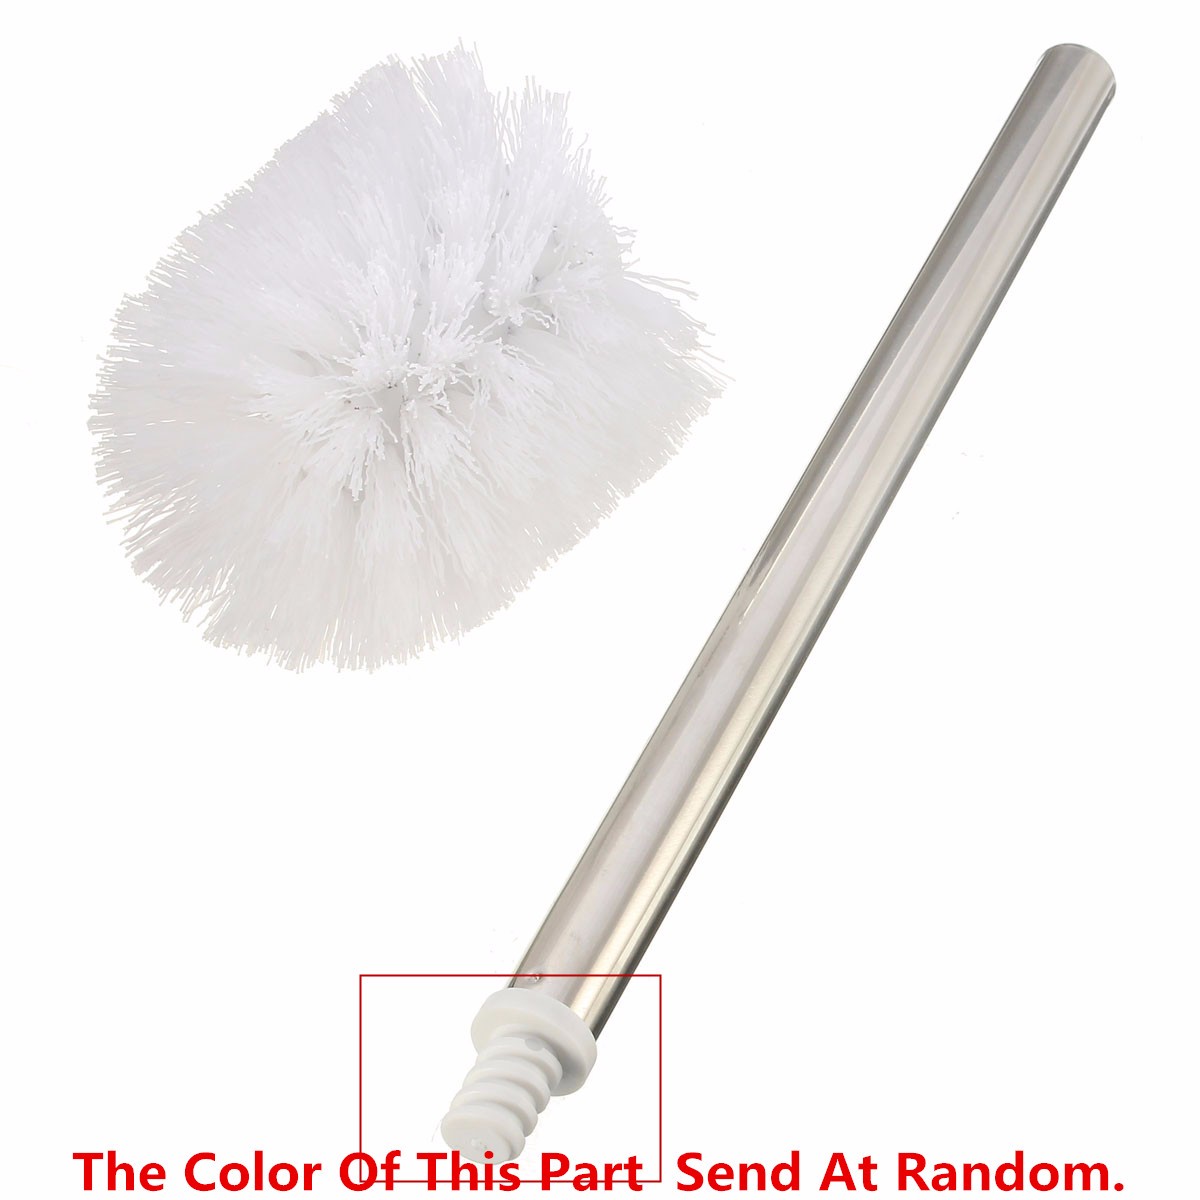 Stainless-Steel-WC-Bathroom-Cleaning-Toilet-Brush-White-Head-Holders-Cleaning-Brushes-1137680-3